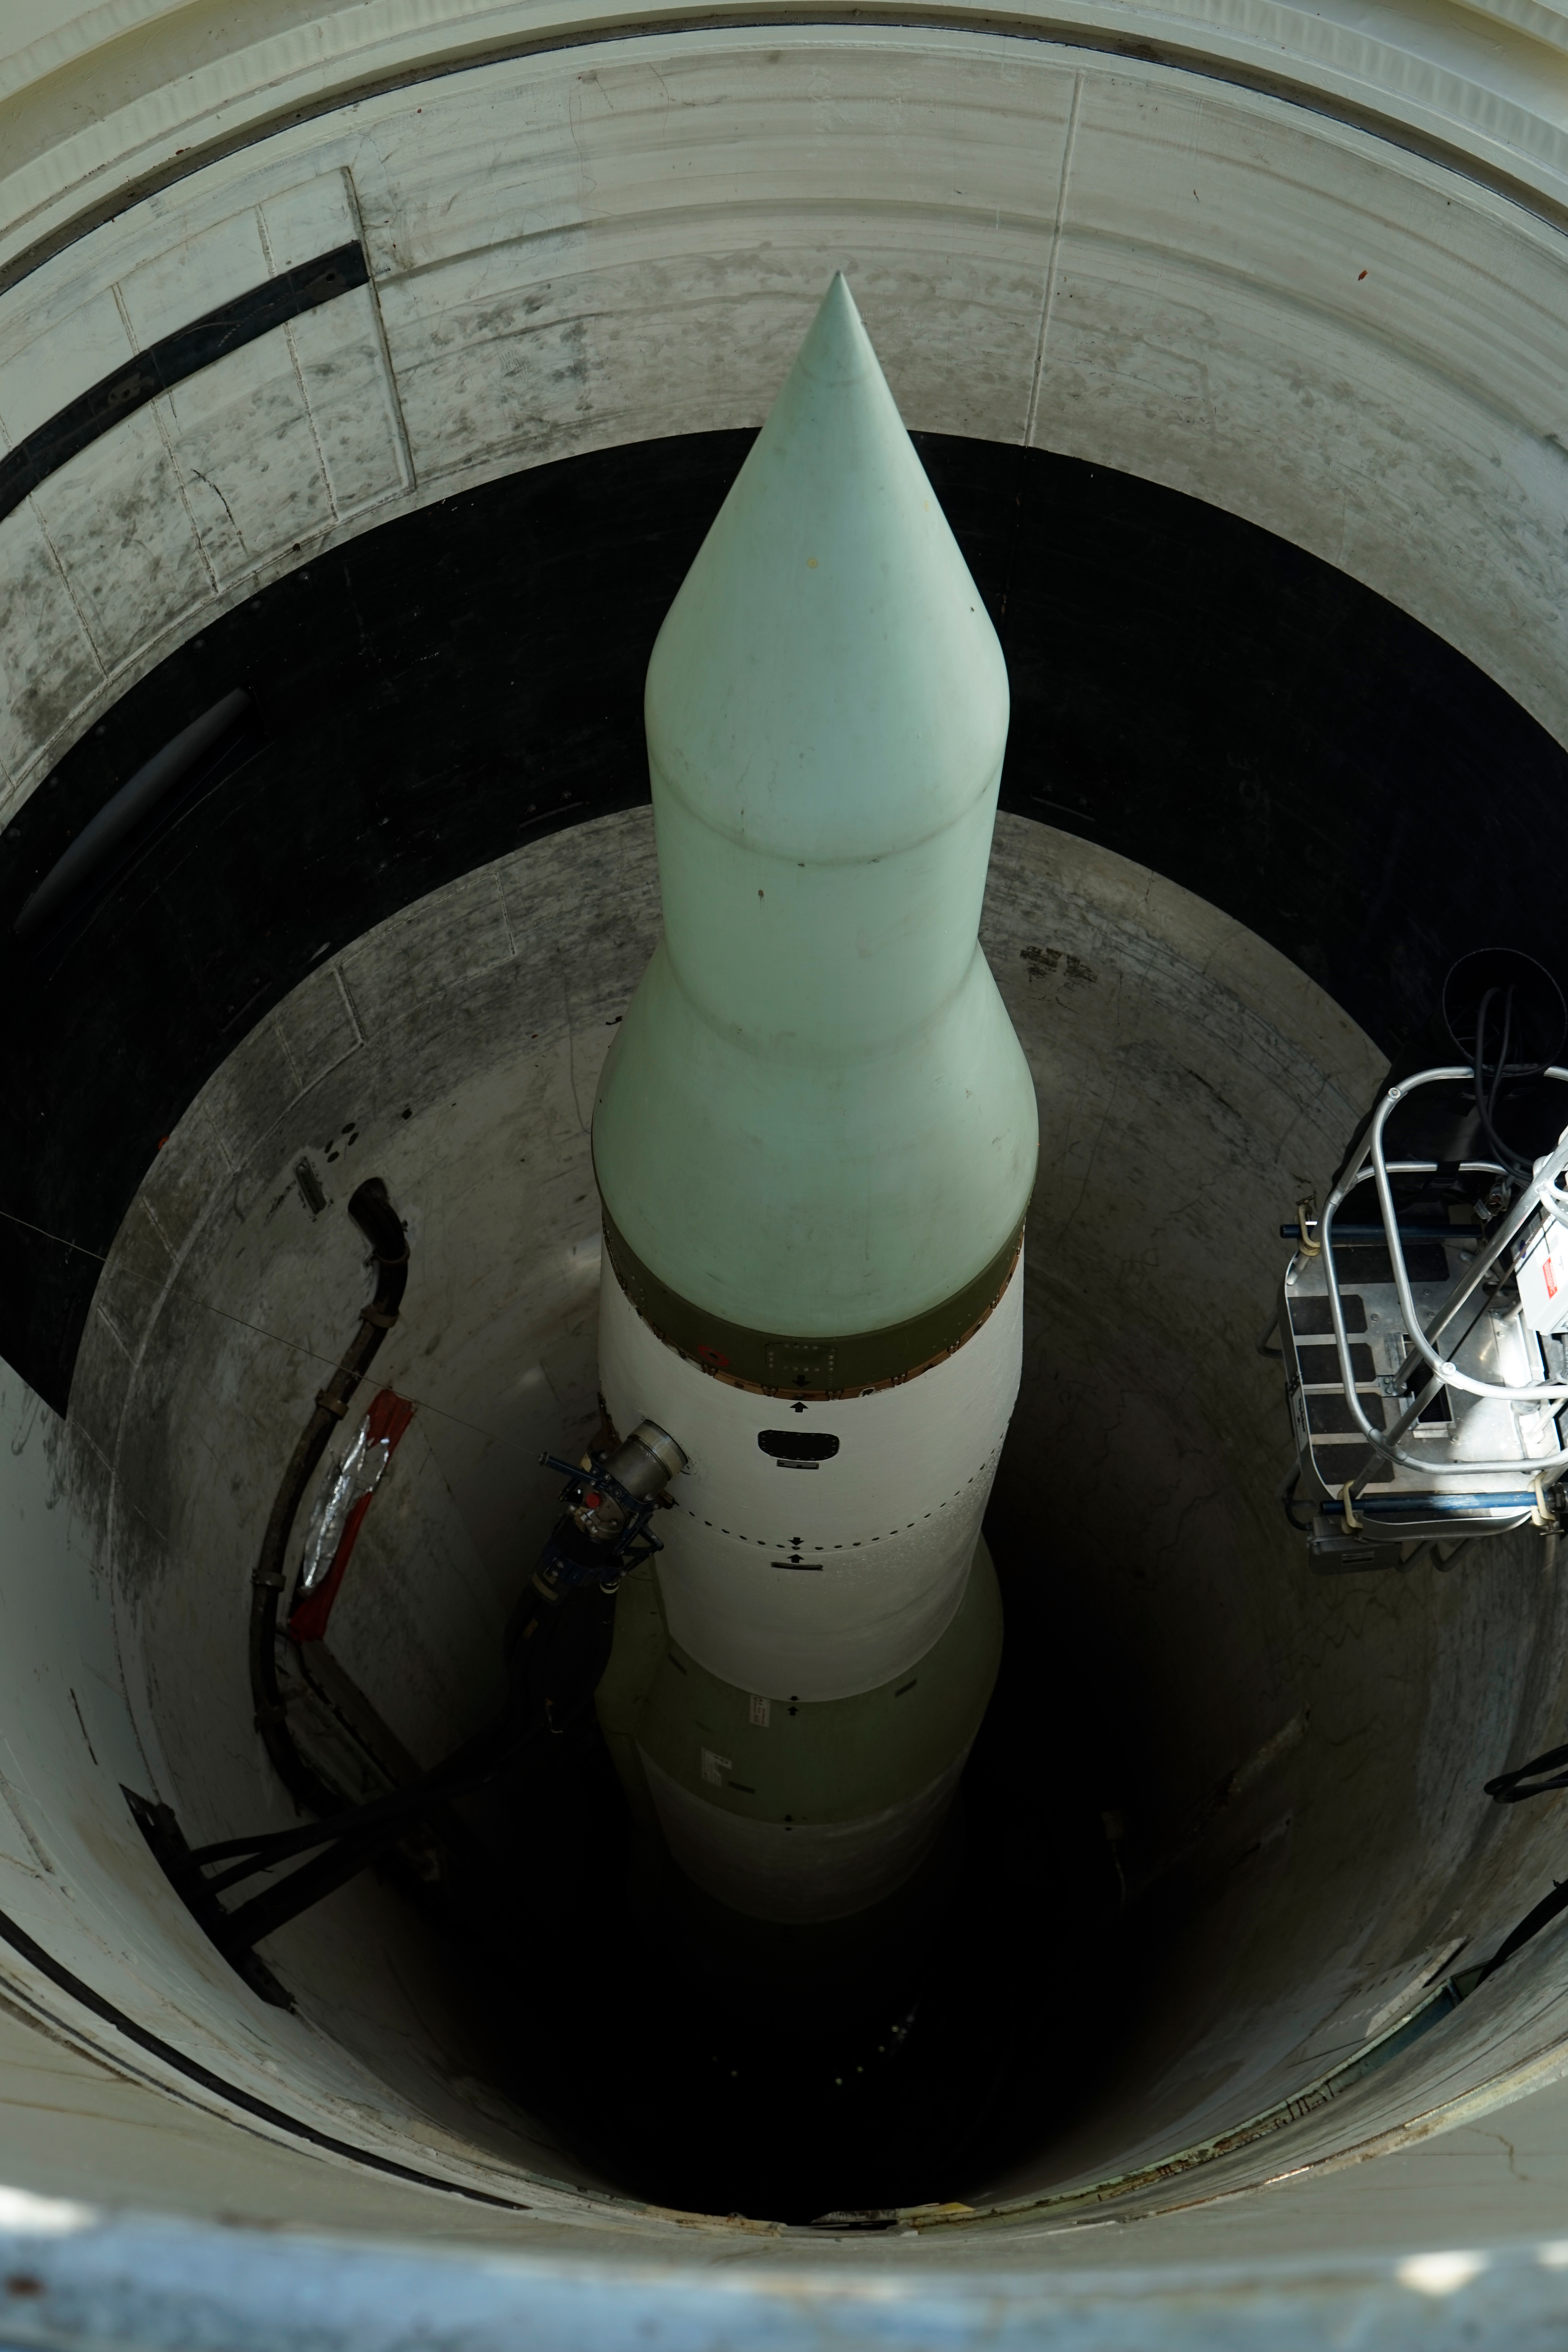 What Is So Special About This Place - Minuteman Missile National